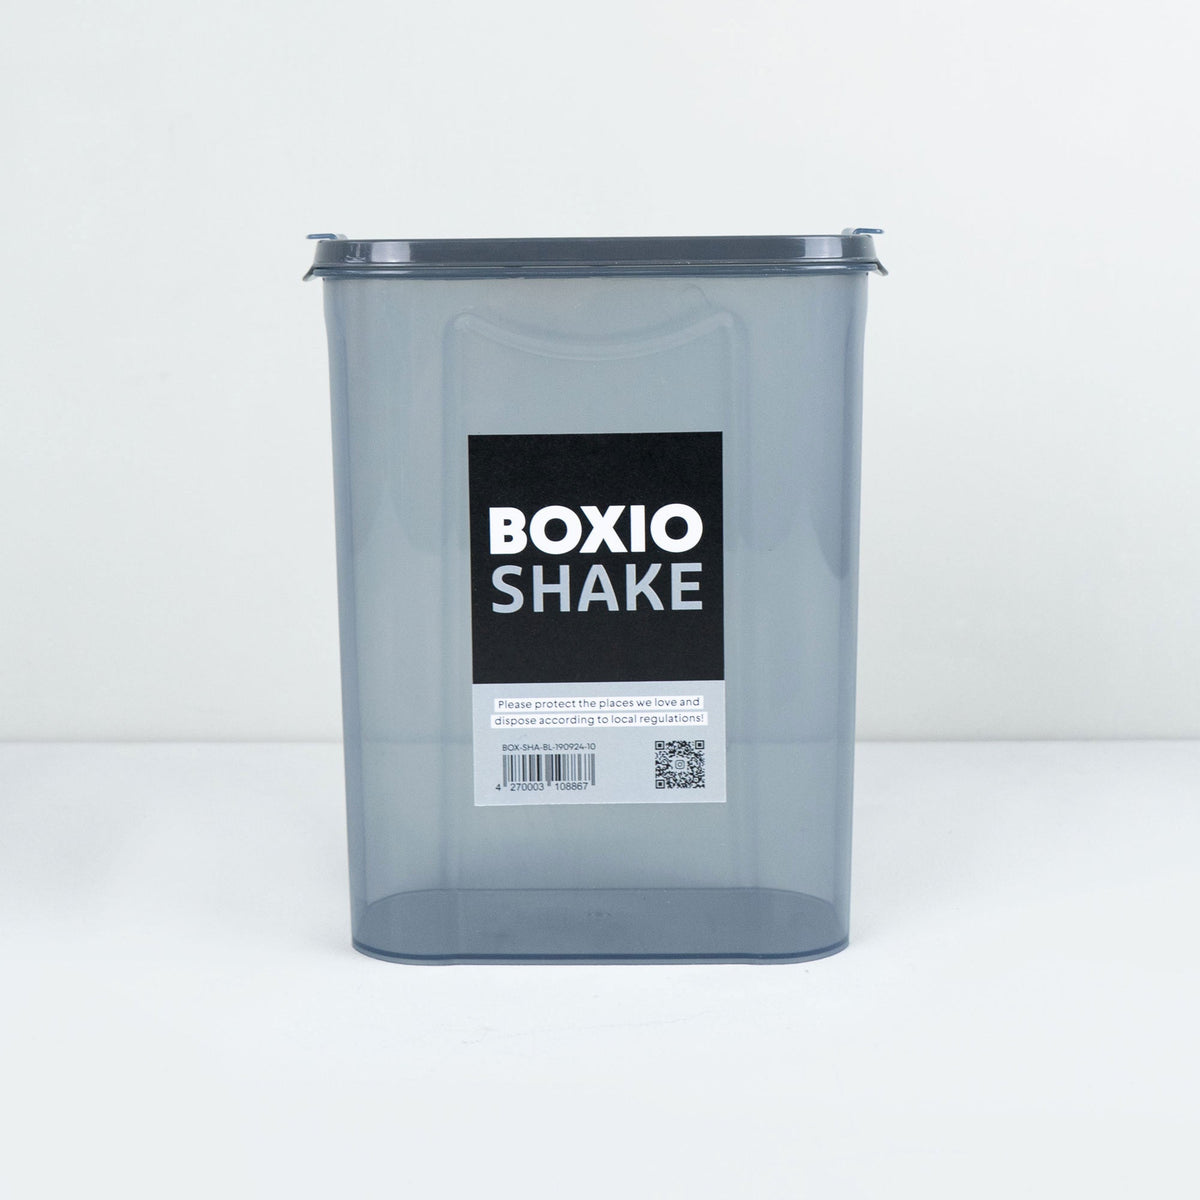 BOXIO - Shake: Plastic Container for Hemp Litter, Food, Dog Food & Meal Box. Organization Made Easy with Our Storage Box As The Perfect Litter Aid for